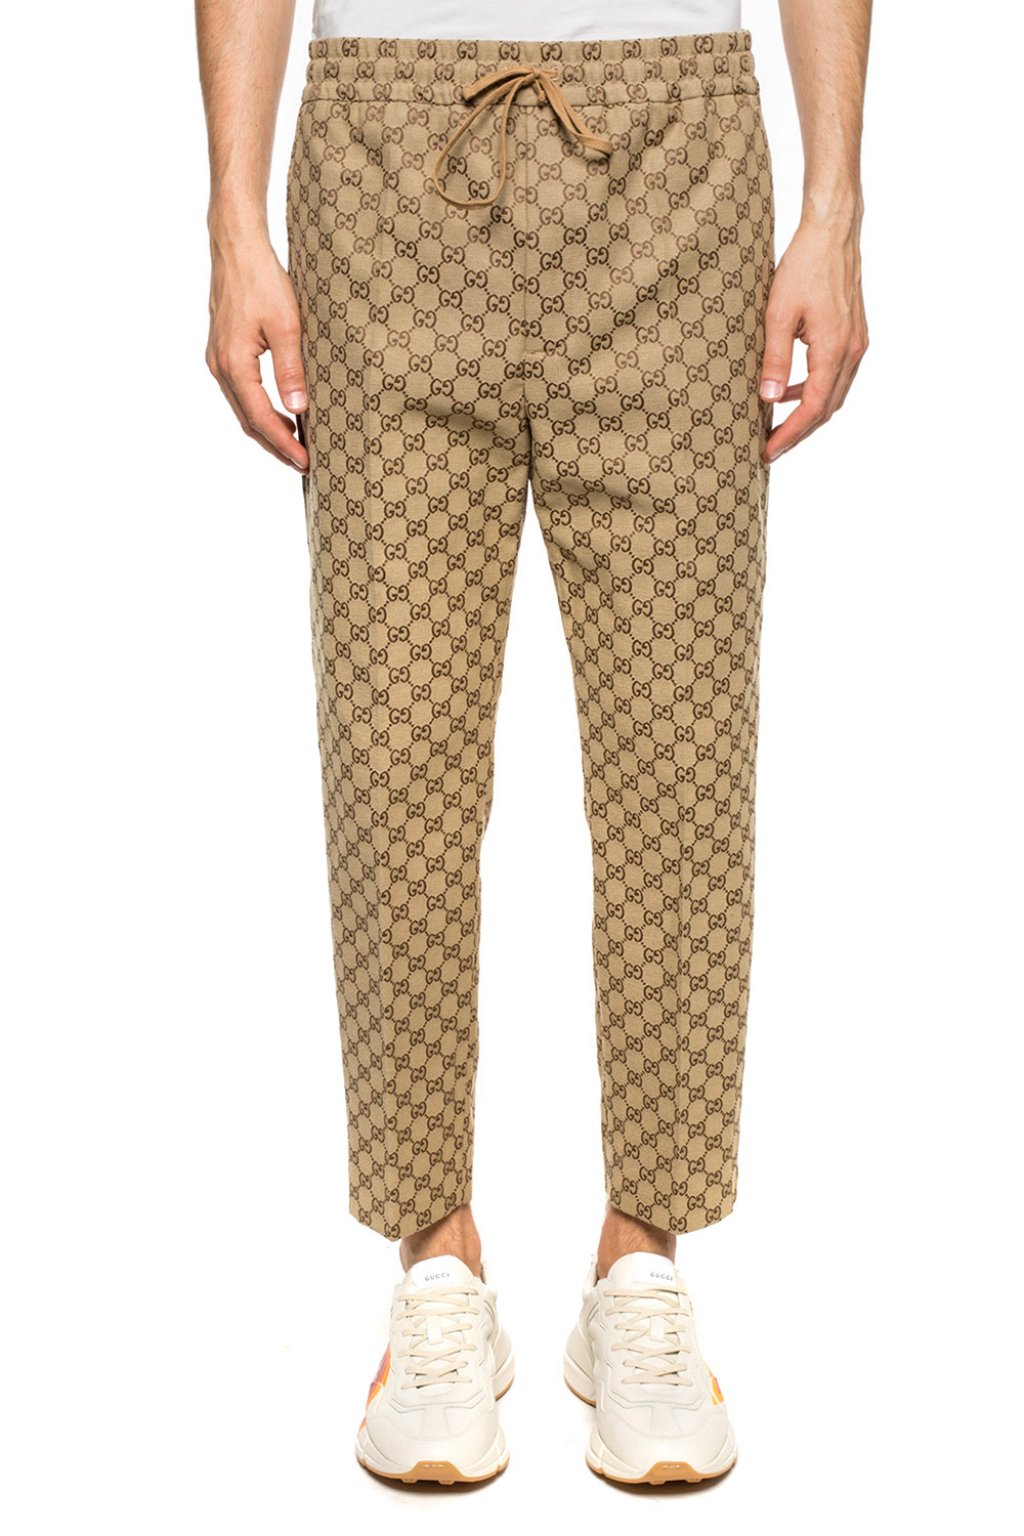 Gucci Logo-patterned pleat-front trousers | Men's Clothing | Vitkac